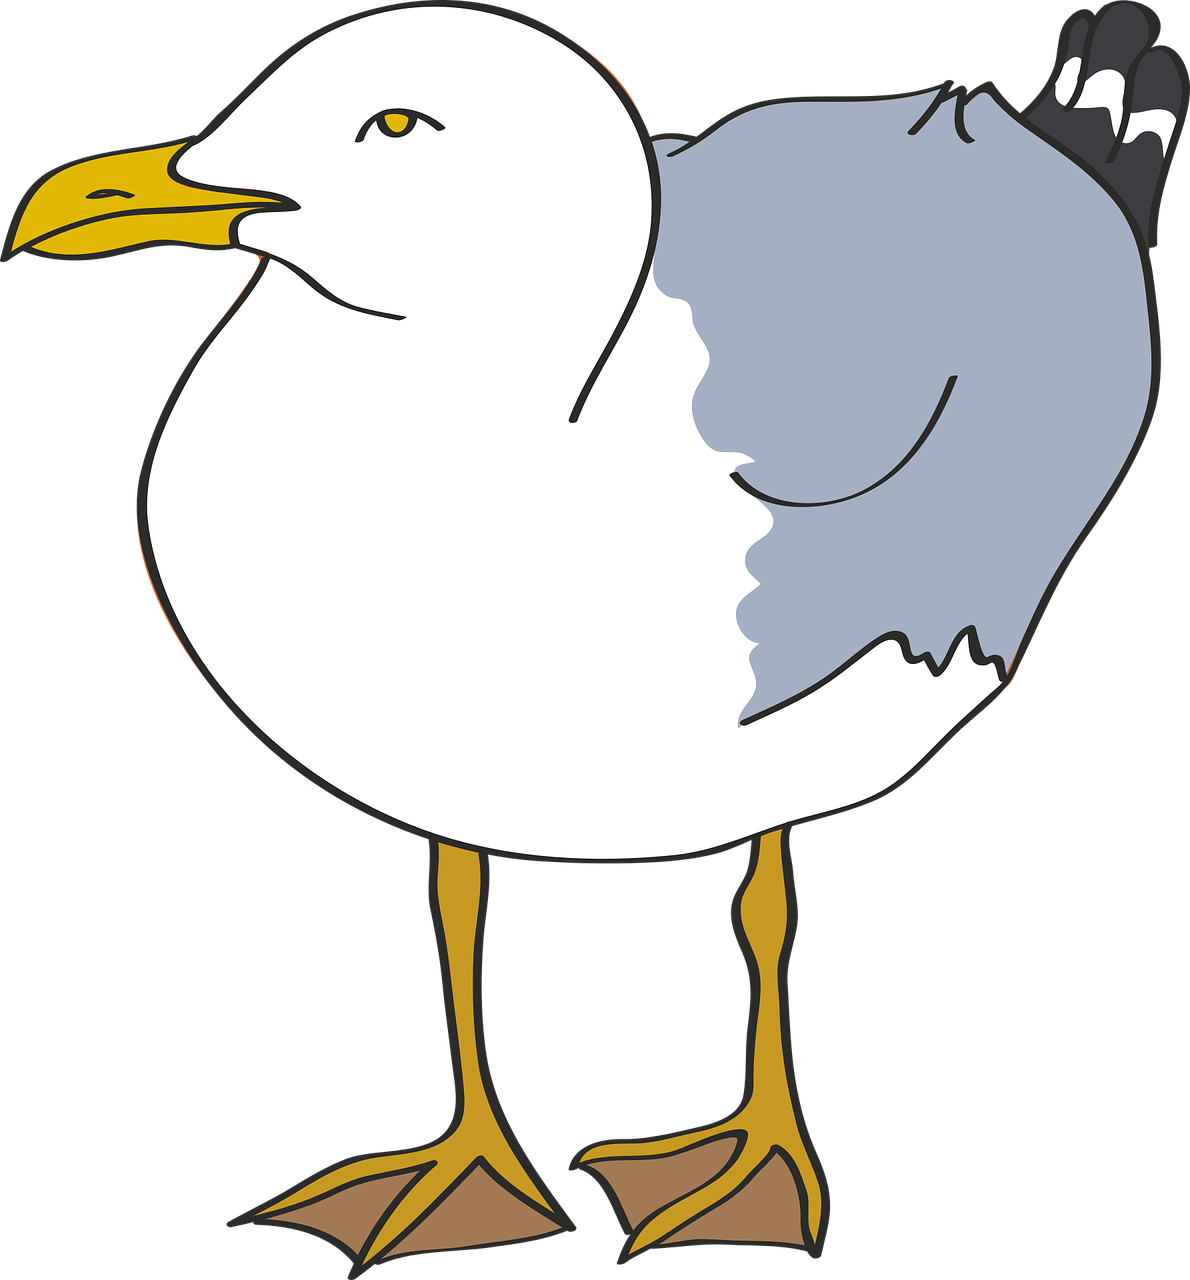 a close up of a seagull on a black background, an illustration of, mingei, fullbody photo, vectorised, funny illustration, photo photo